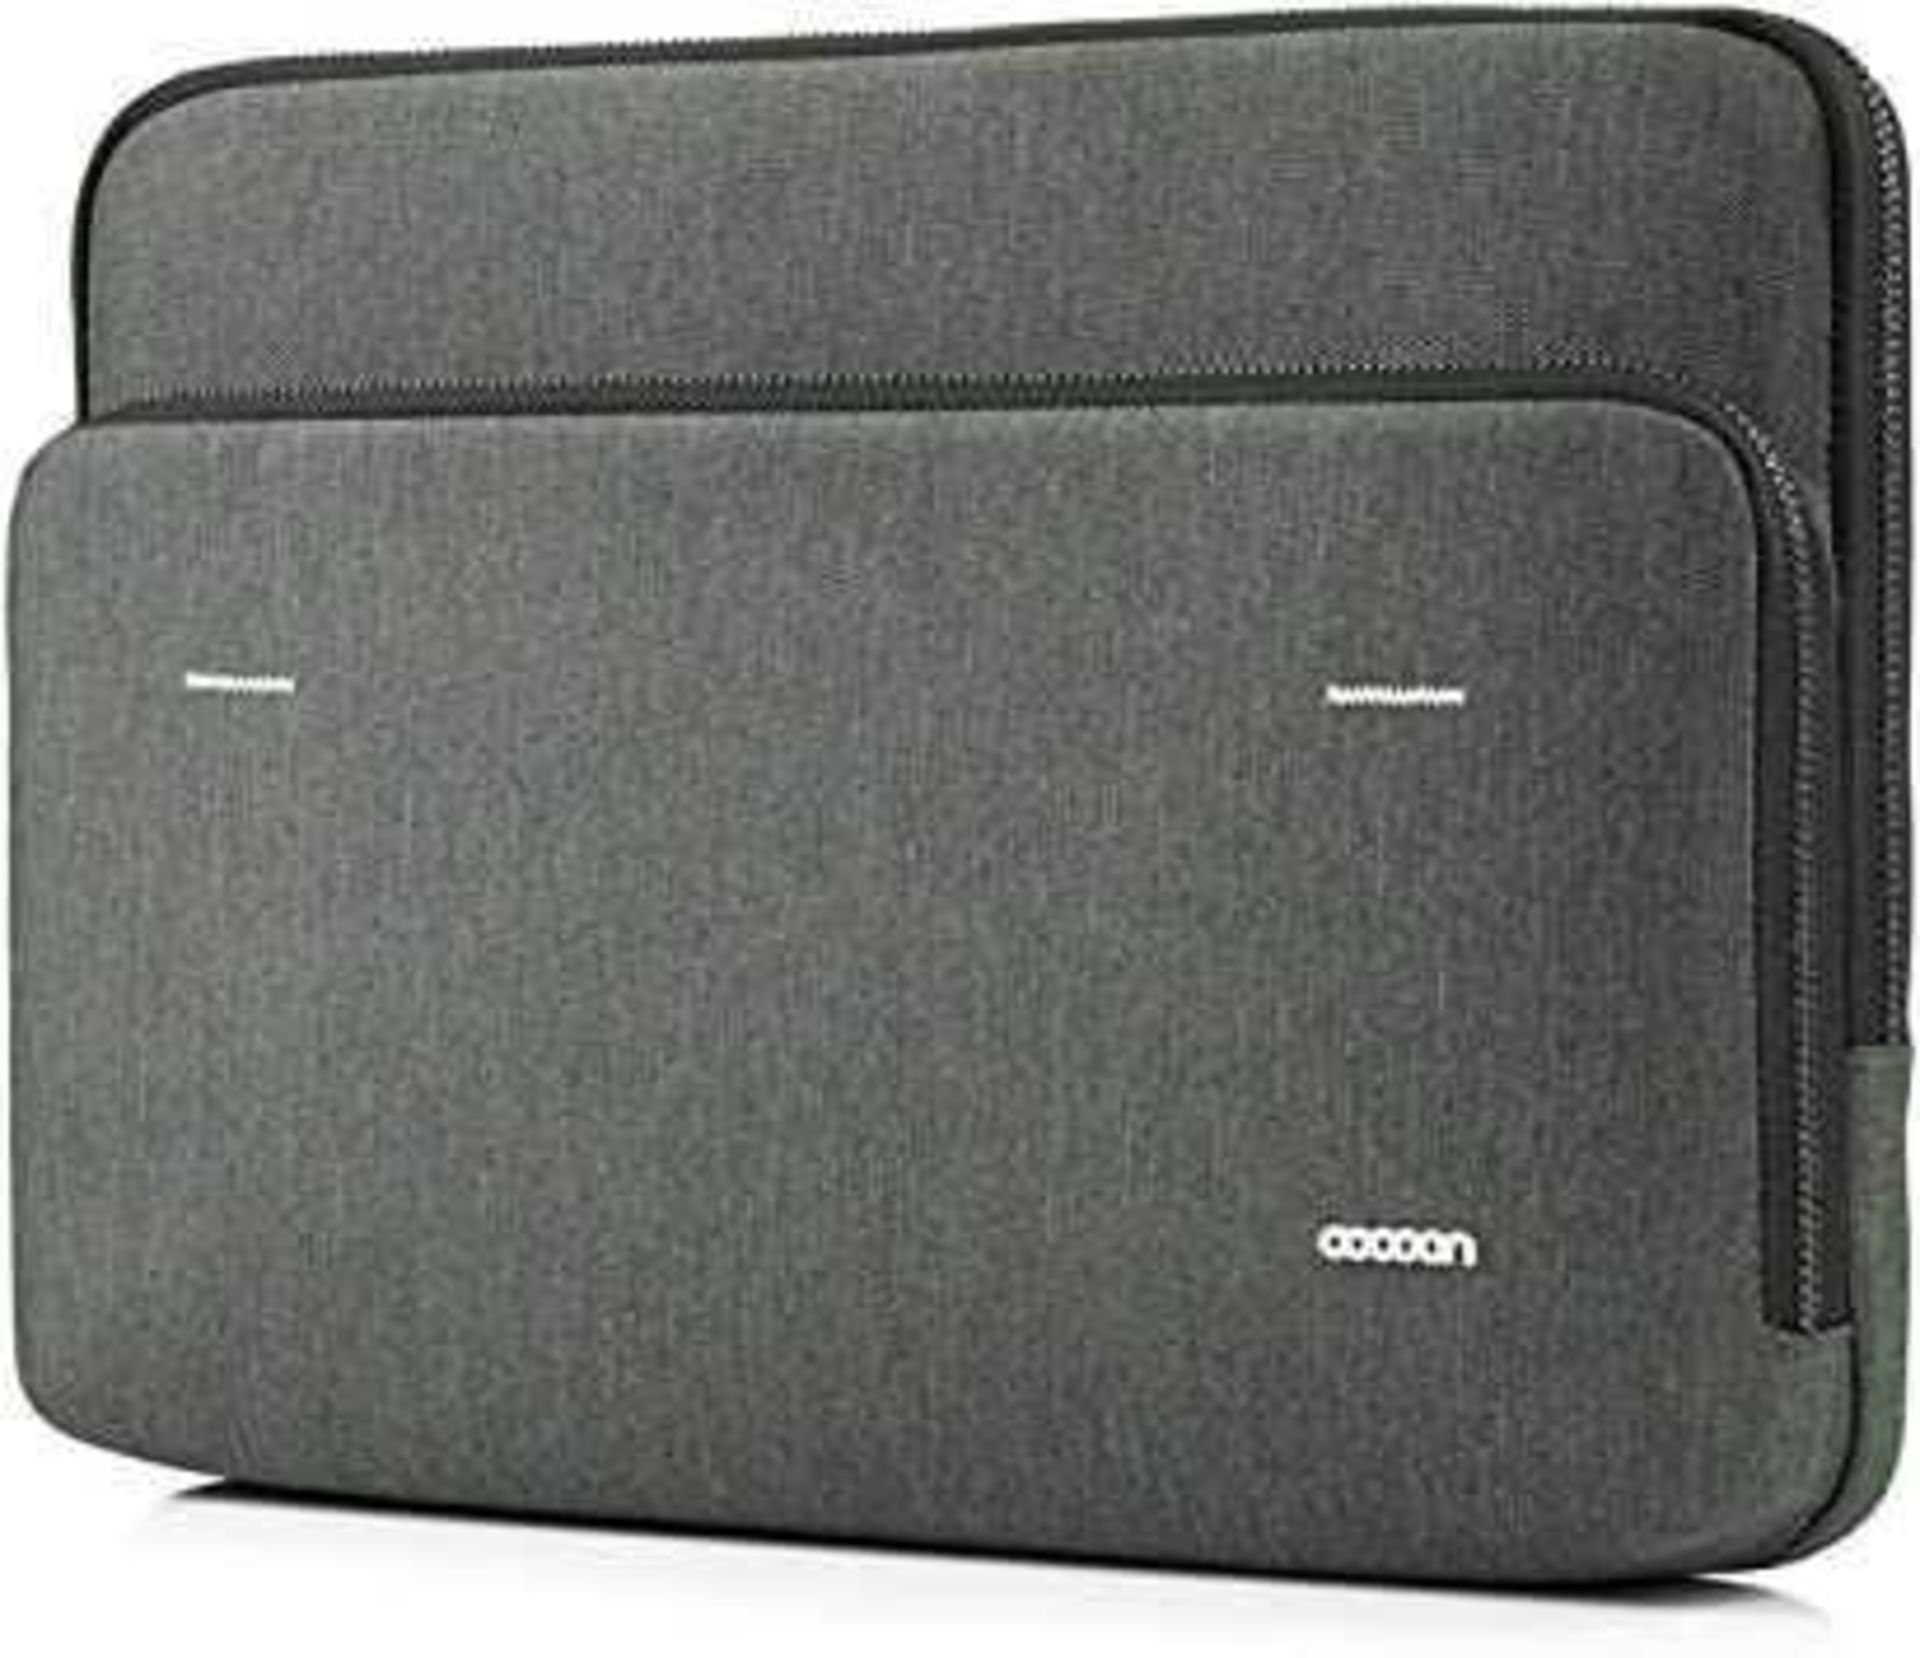 (Jb) RRP £250 Lot To Contain 5 Brand New Cocoon Macbook 15Inch Sleeves With Built In Grid-It Accesso